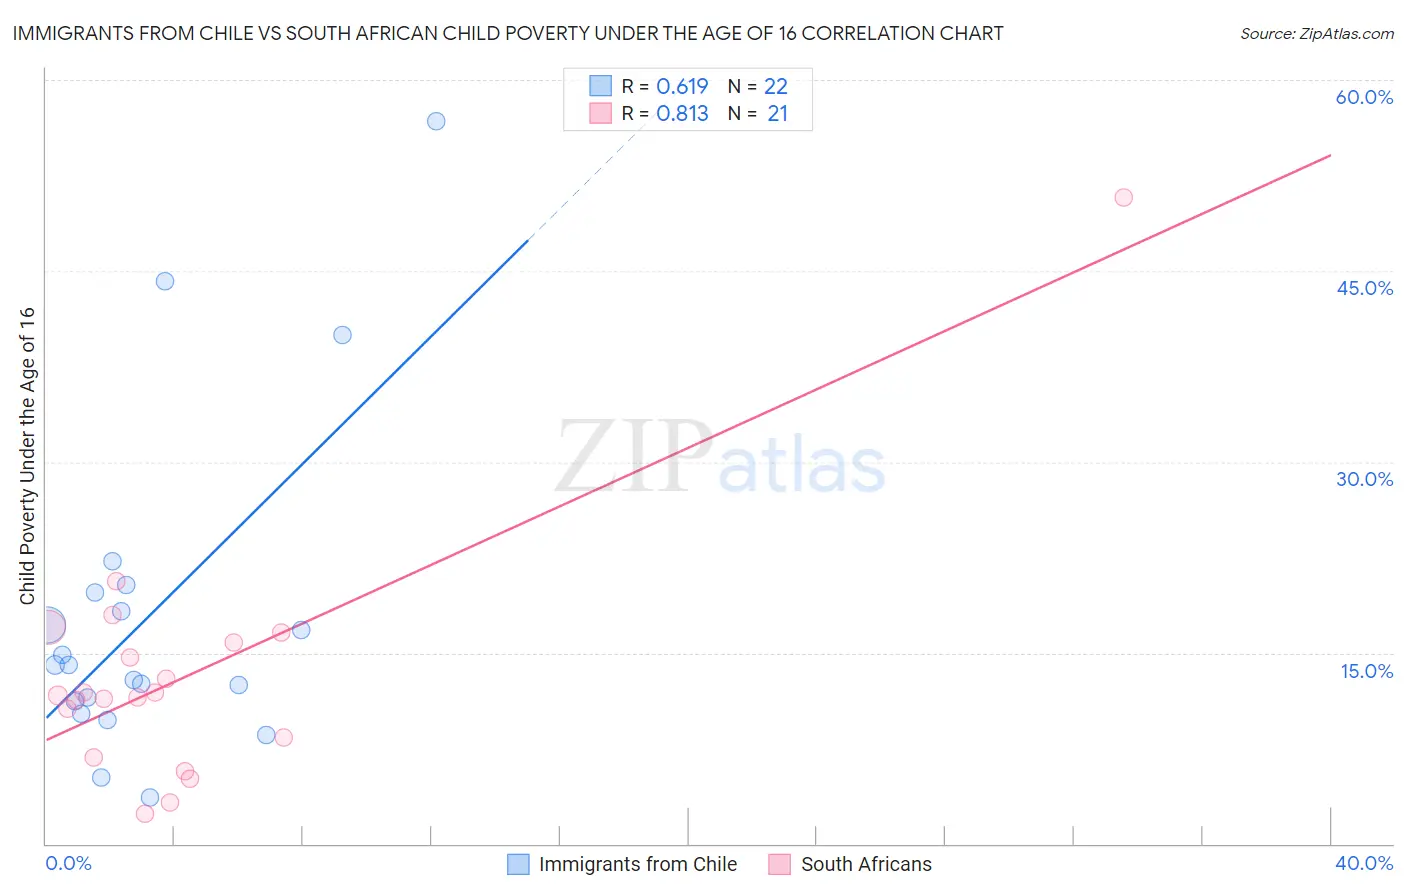 Immigrants from Chile vs South African Child Poverty Under the Age of 16